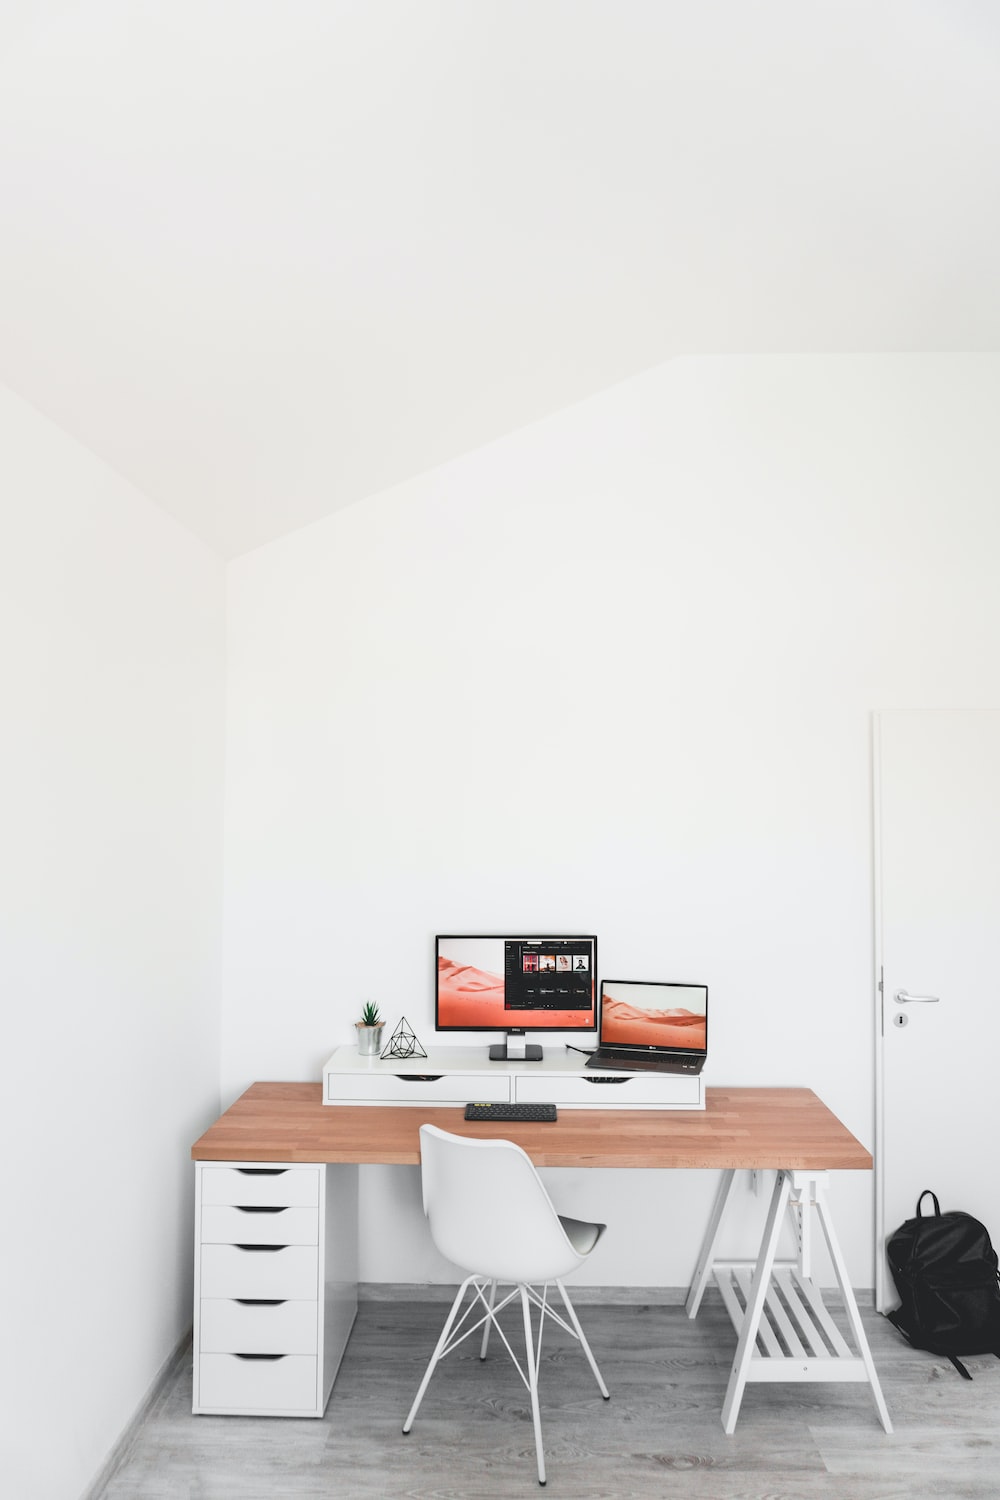 Should your desk be in your bedroom?